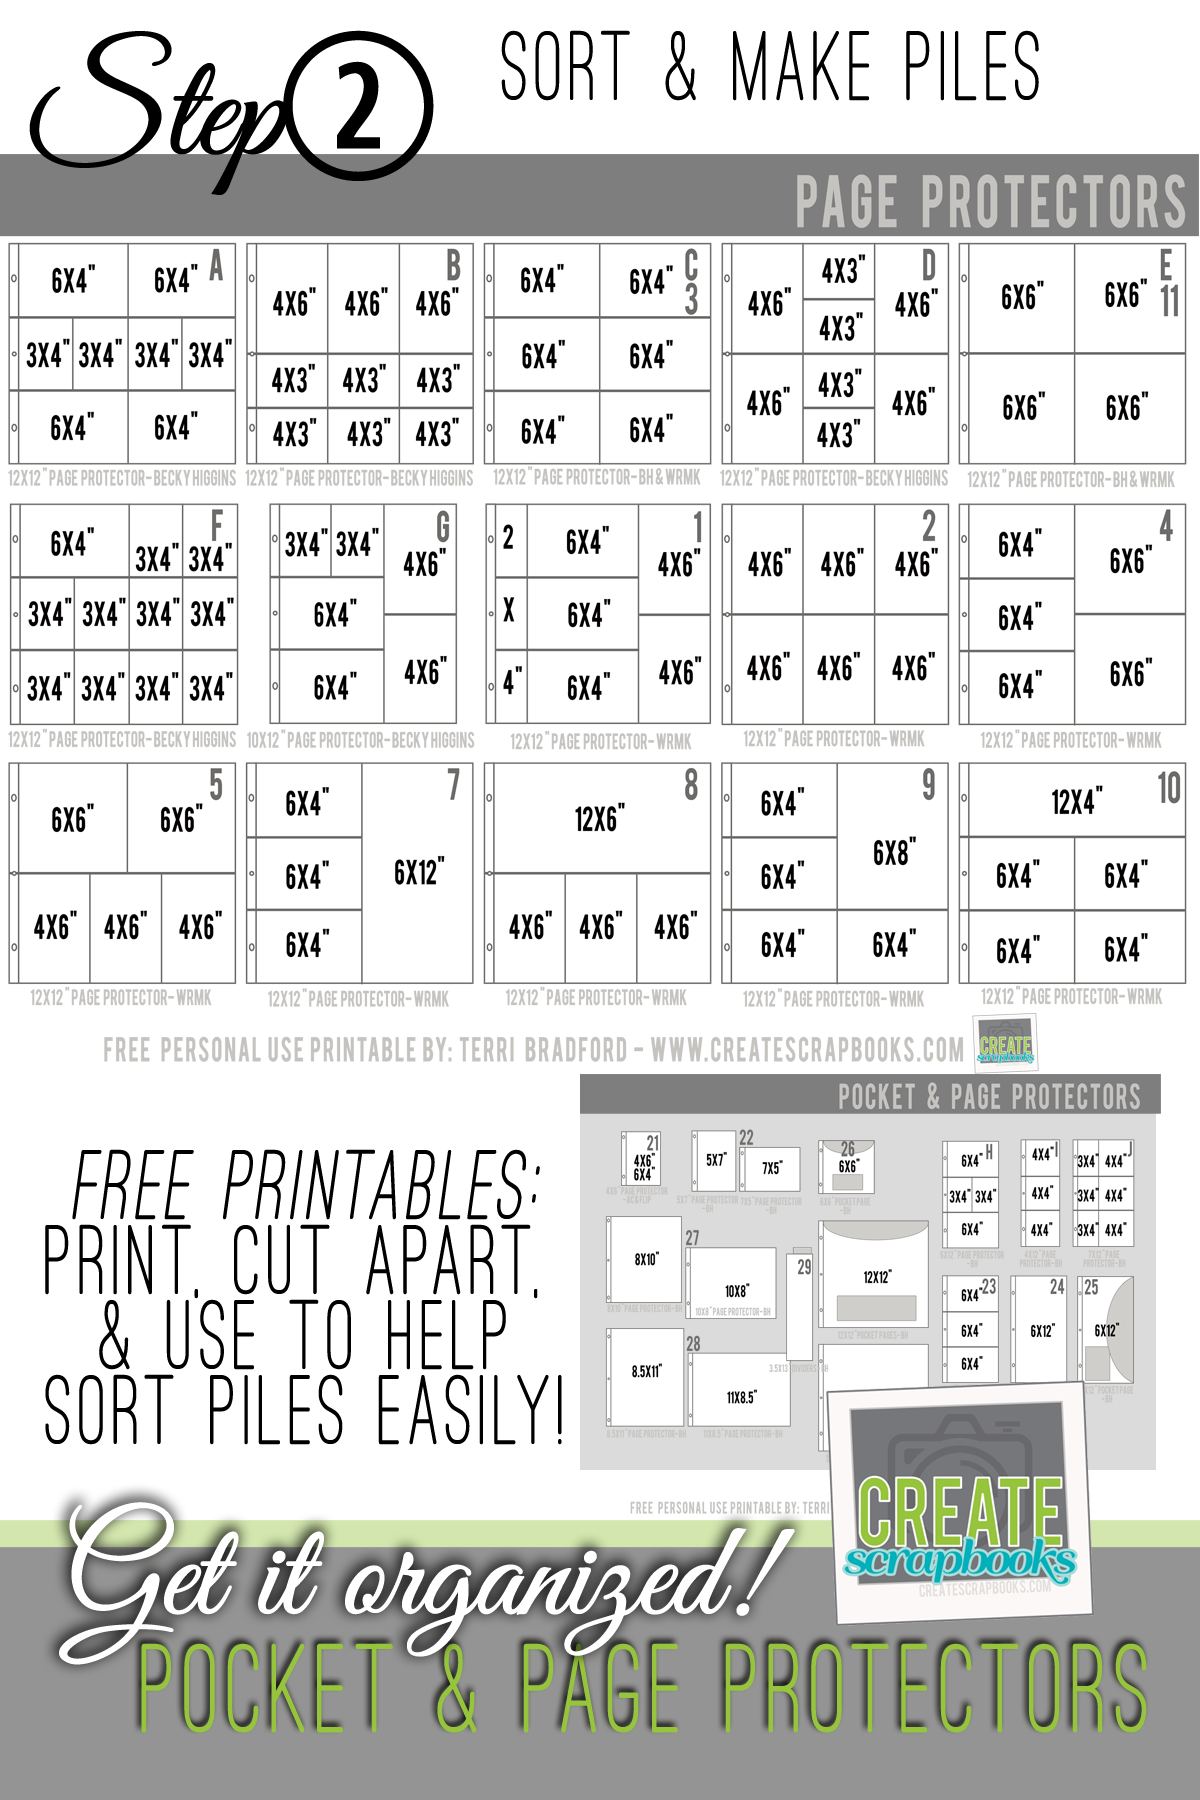 Step 2: FREE printables from CreateScrapbooks.com to organize your pocket and page protectors for project life!